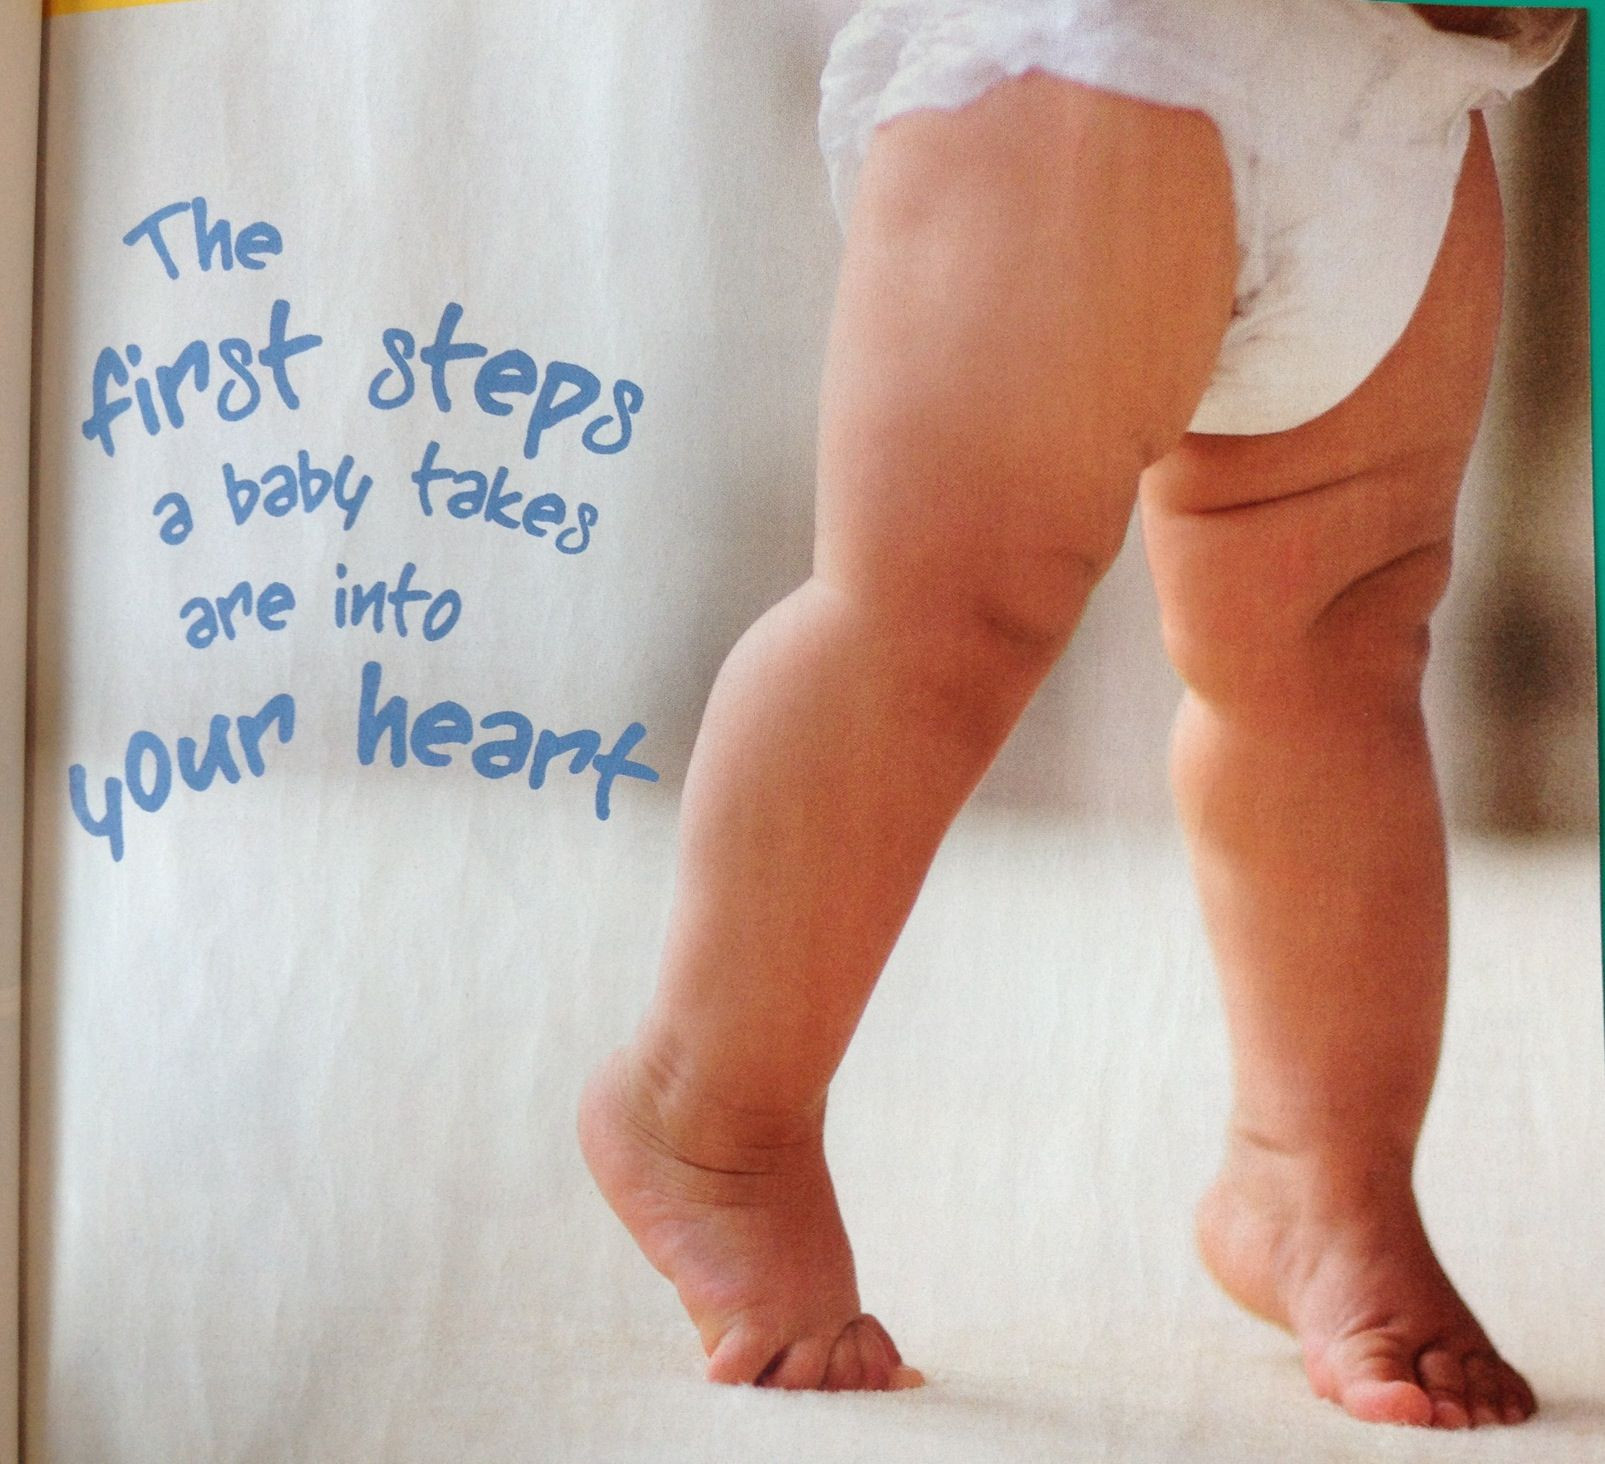 Baby First Step Quotes
 A baby s first steps are into your heart